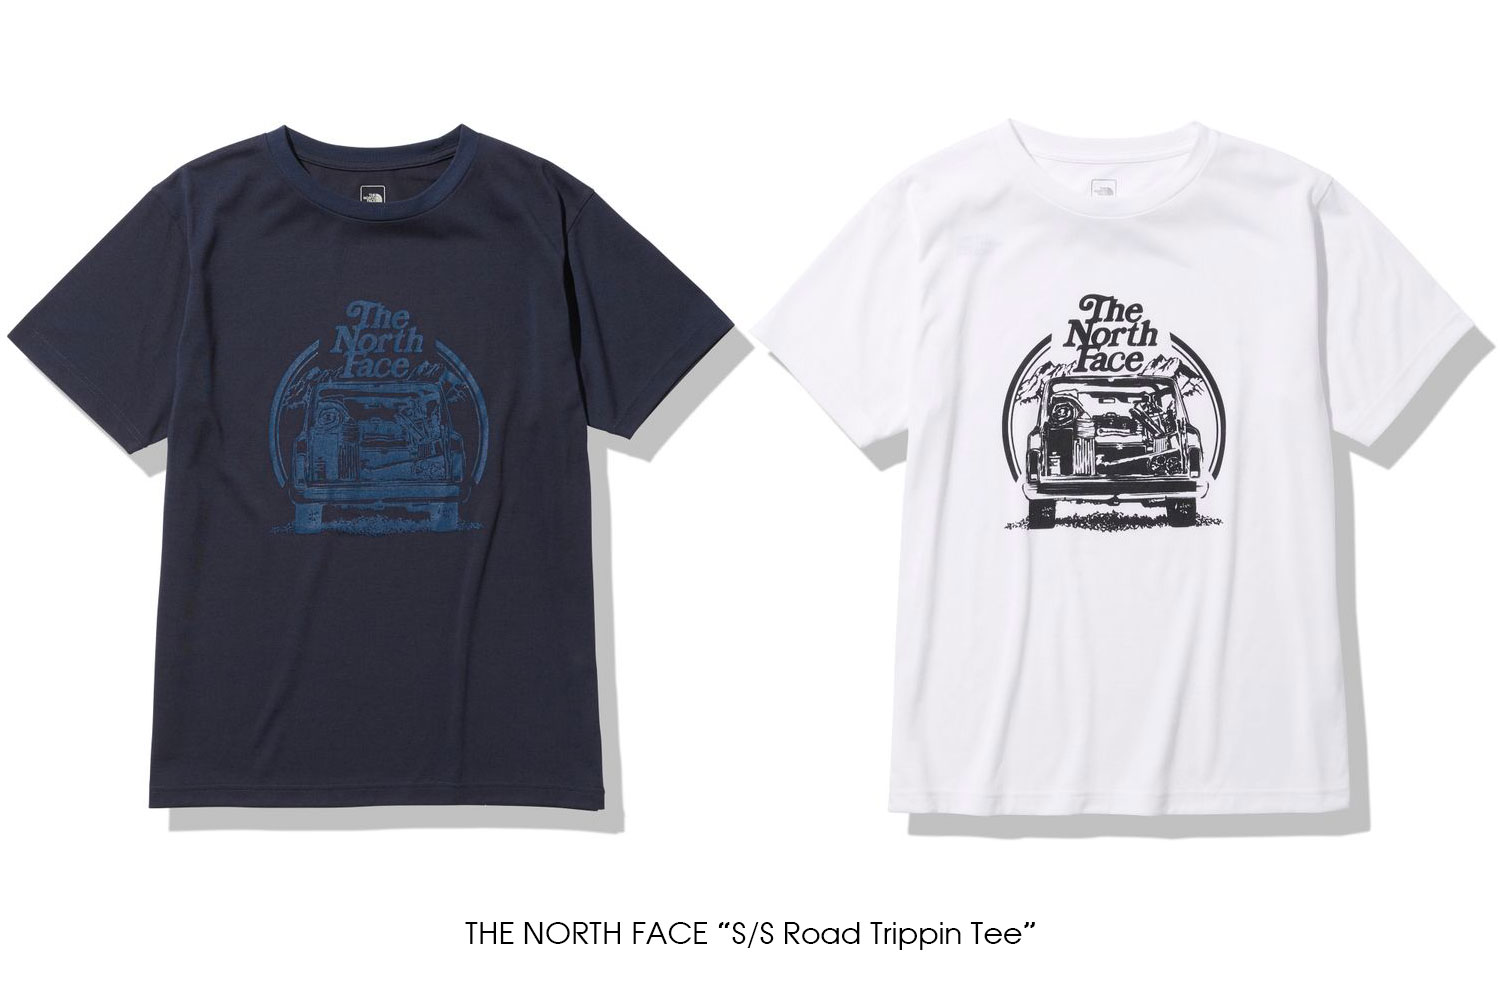 THE NORTH FACE "S/S Road Trippin Tee"